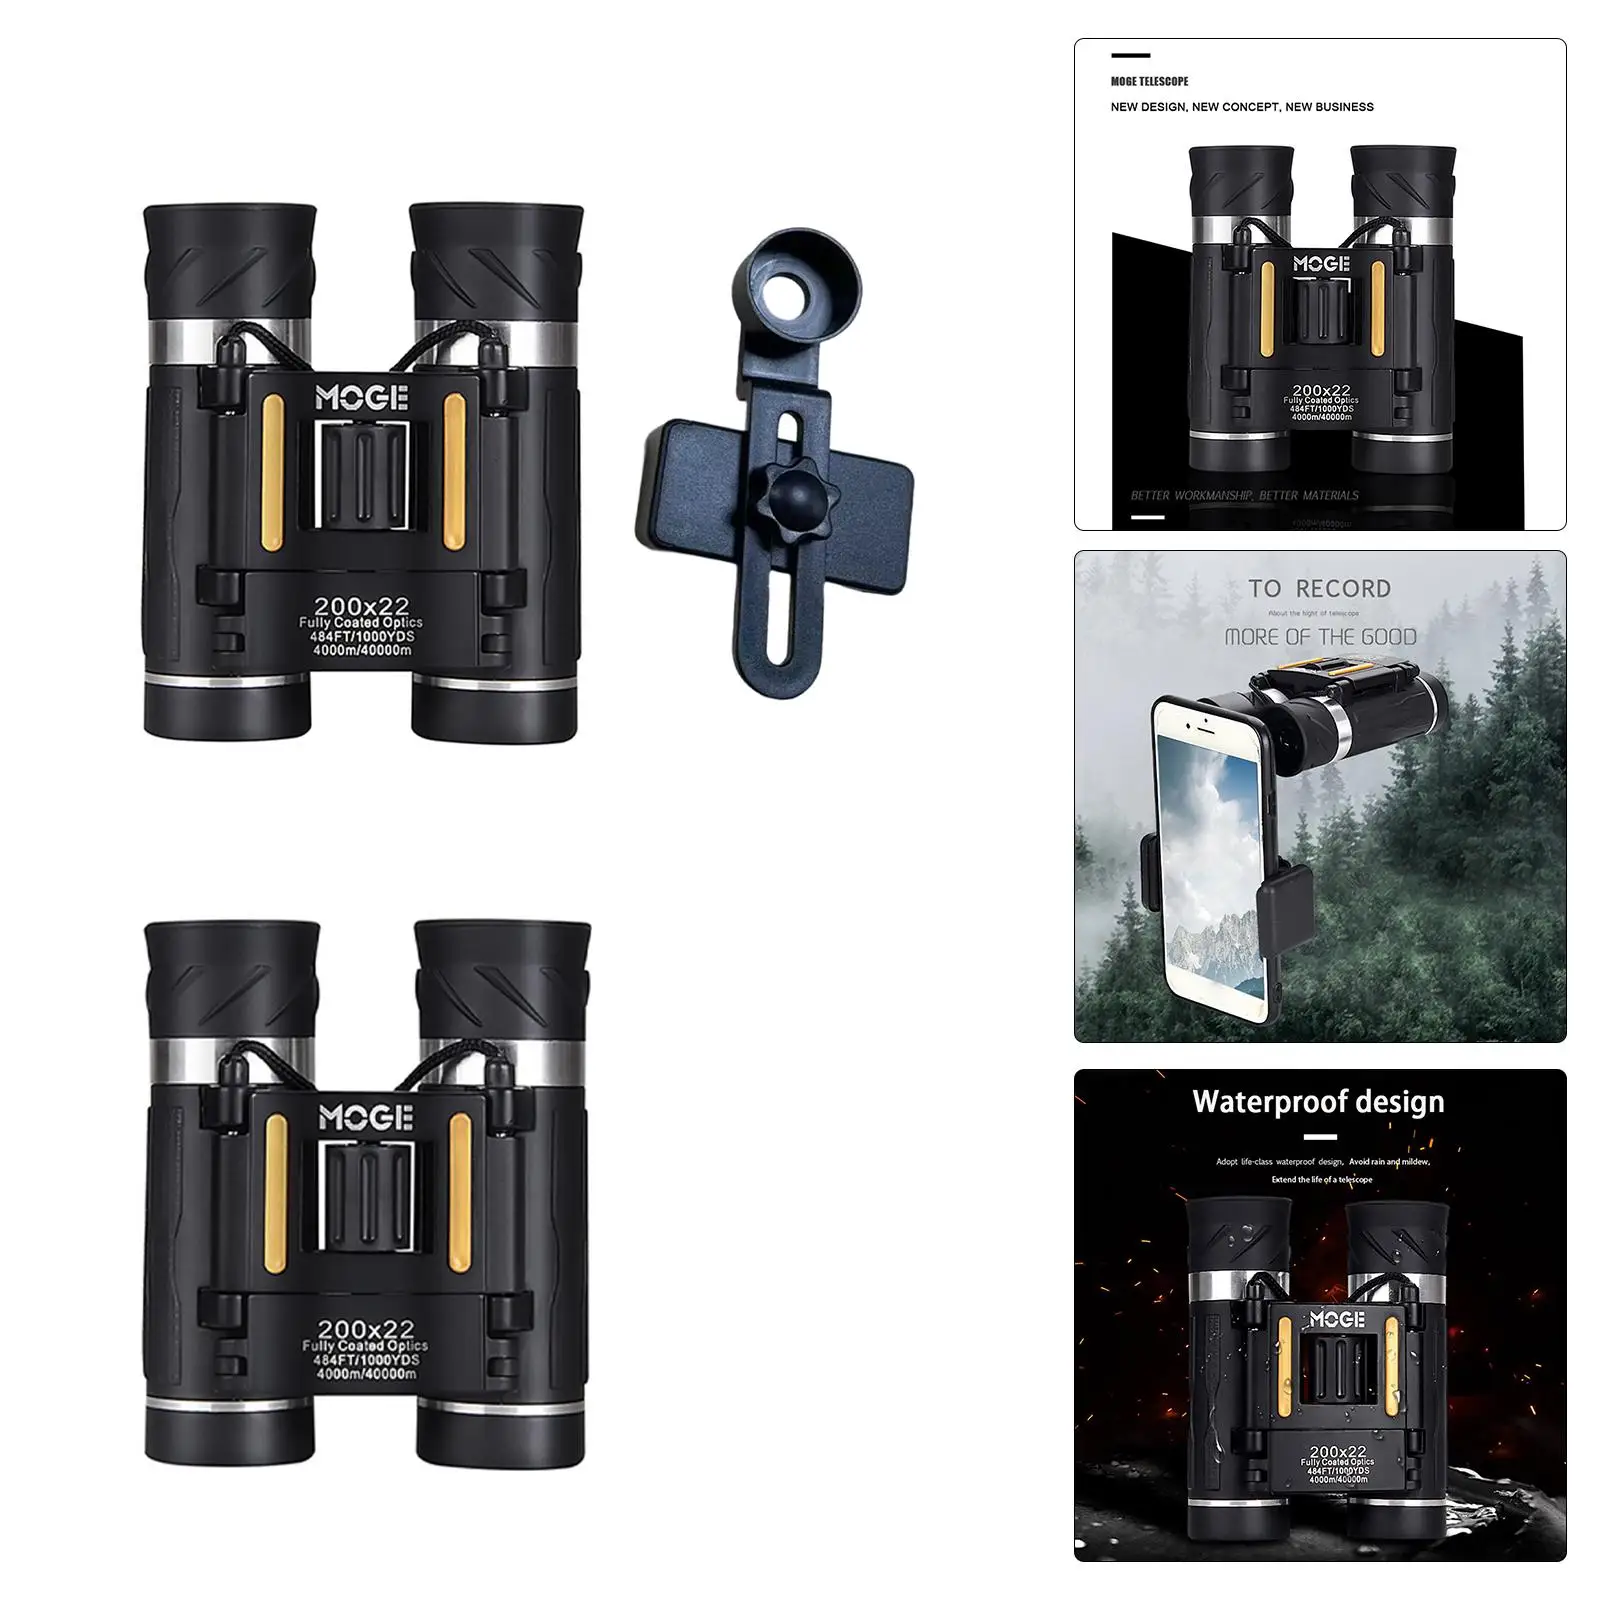 200x22 Fogproof Clear High Power with Clear Low Light  Durable IPX7 Waterproof Large Eyepiece  for Outdoor Opera Hunting